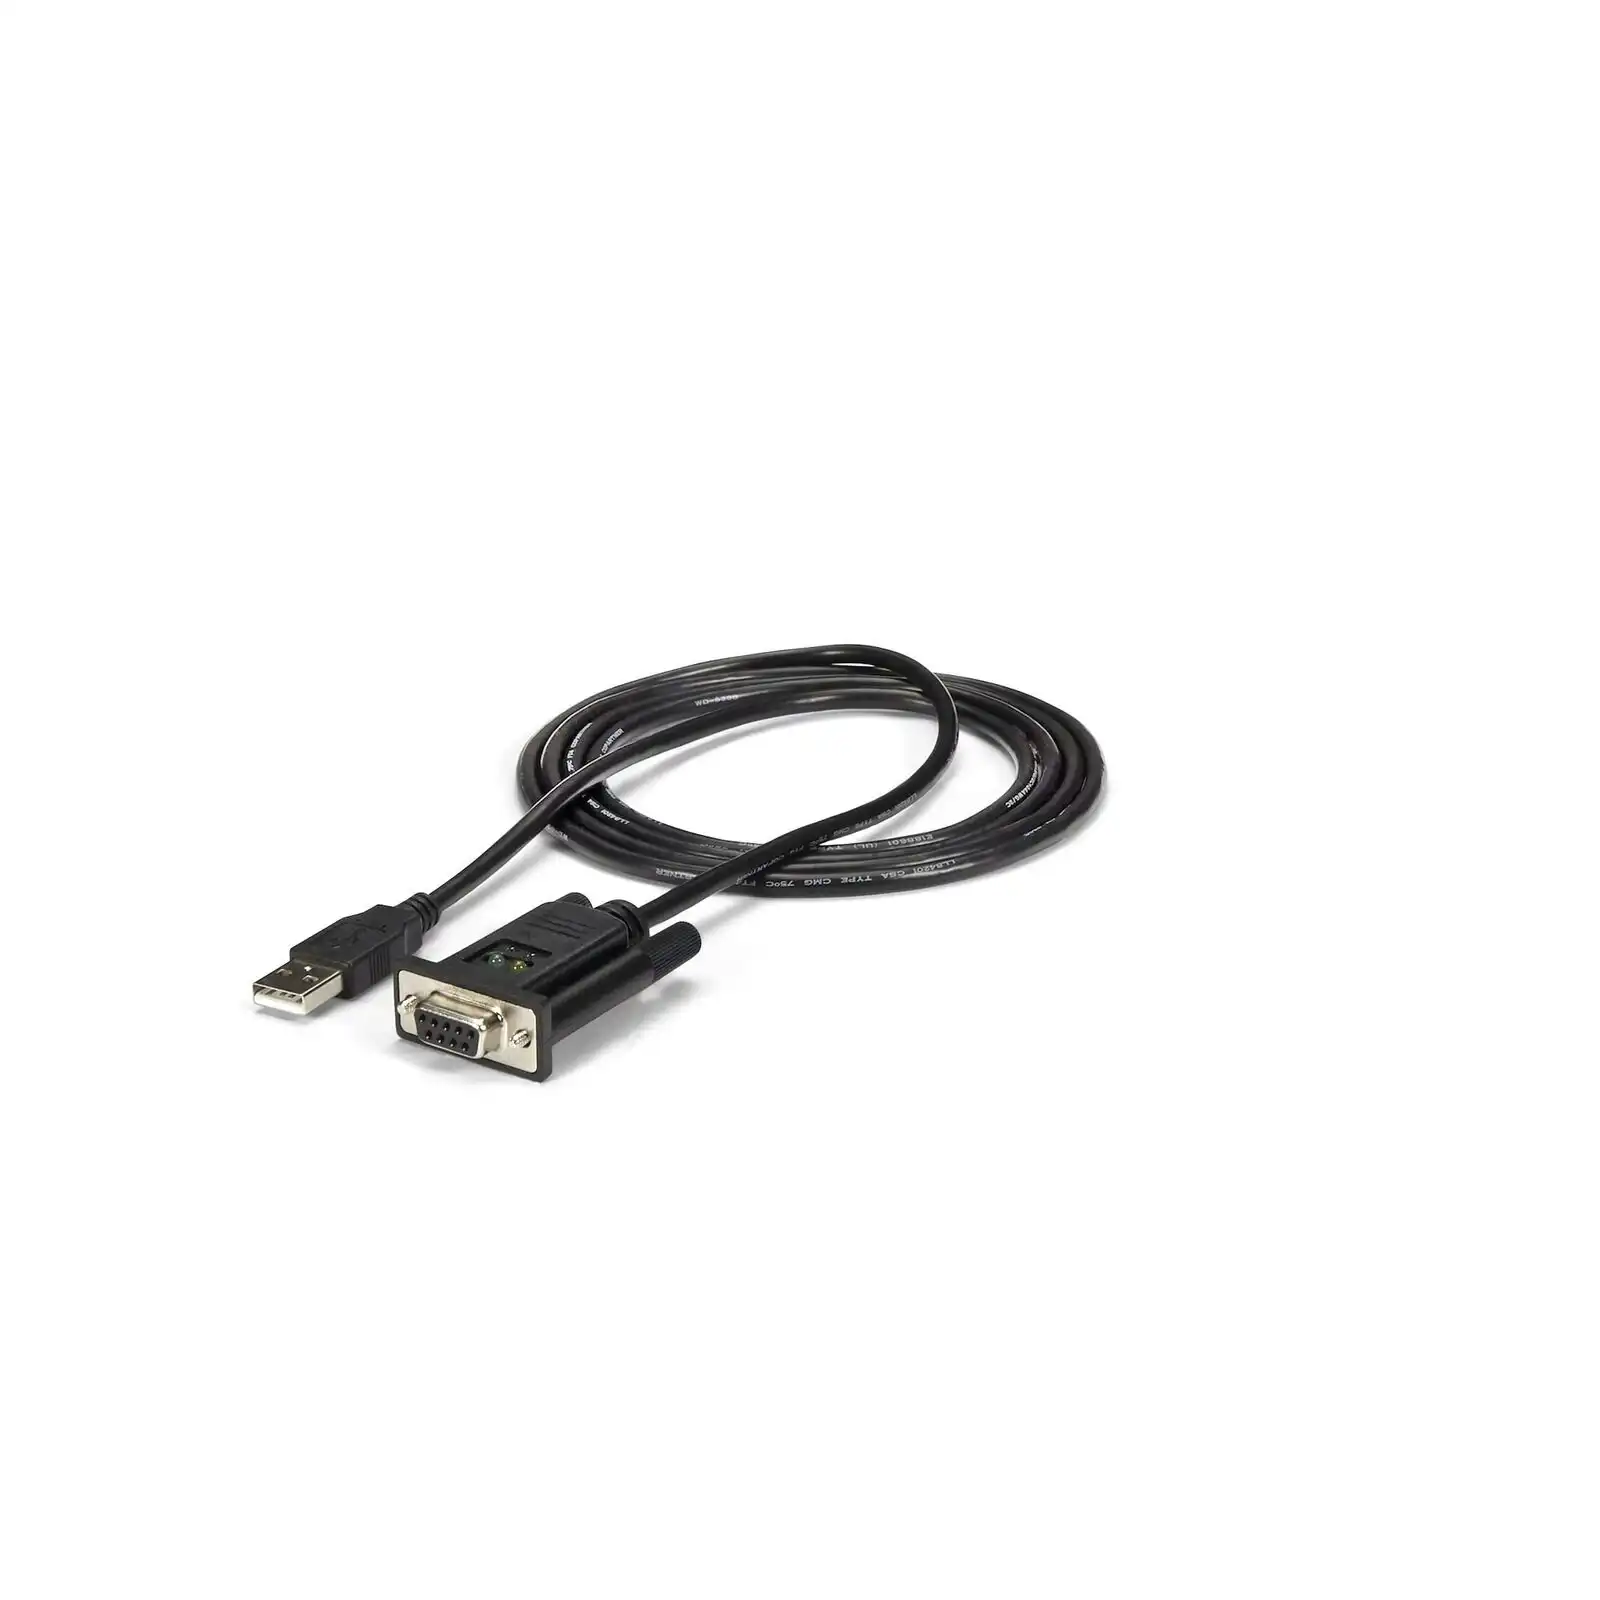 Star Tech USB to Null Modem RS232 DB9 Serial DCE Adapter Cable w/ FTDI for PC